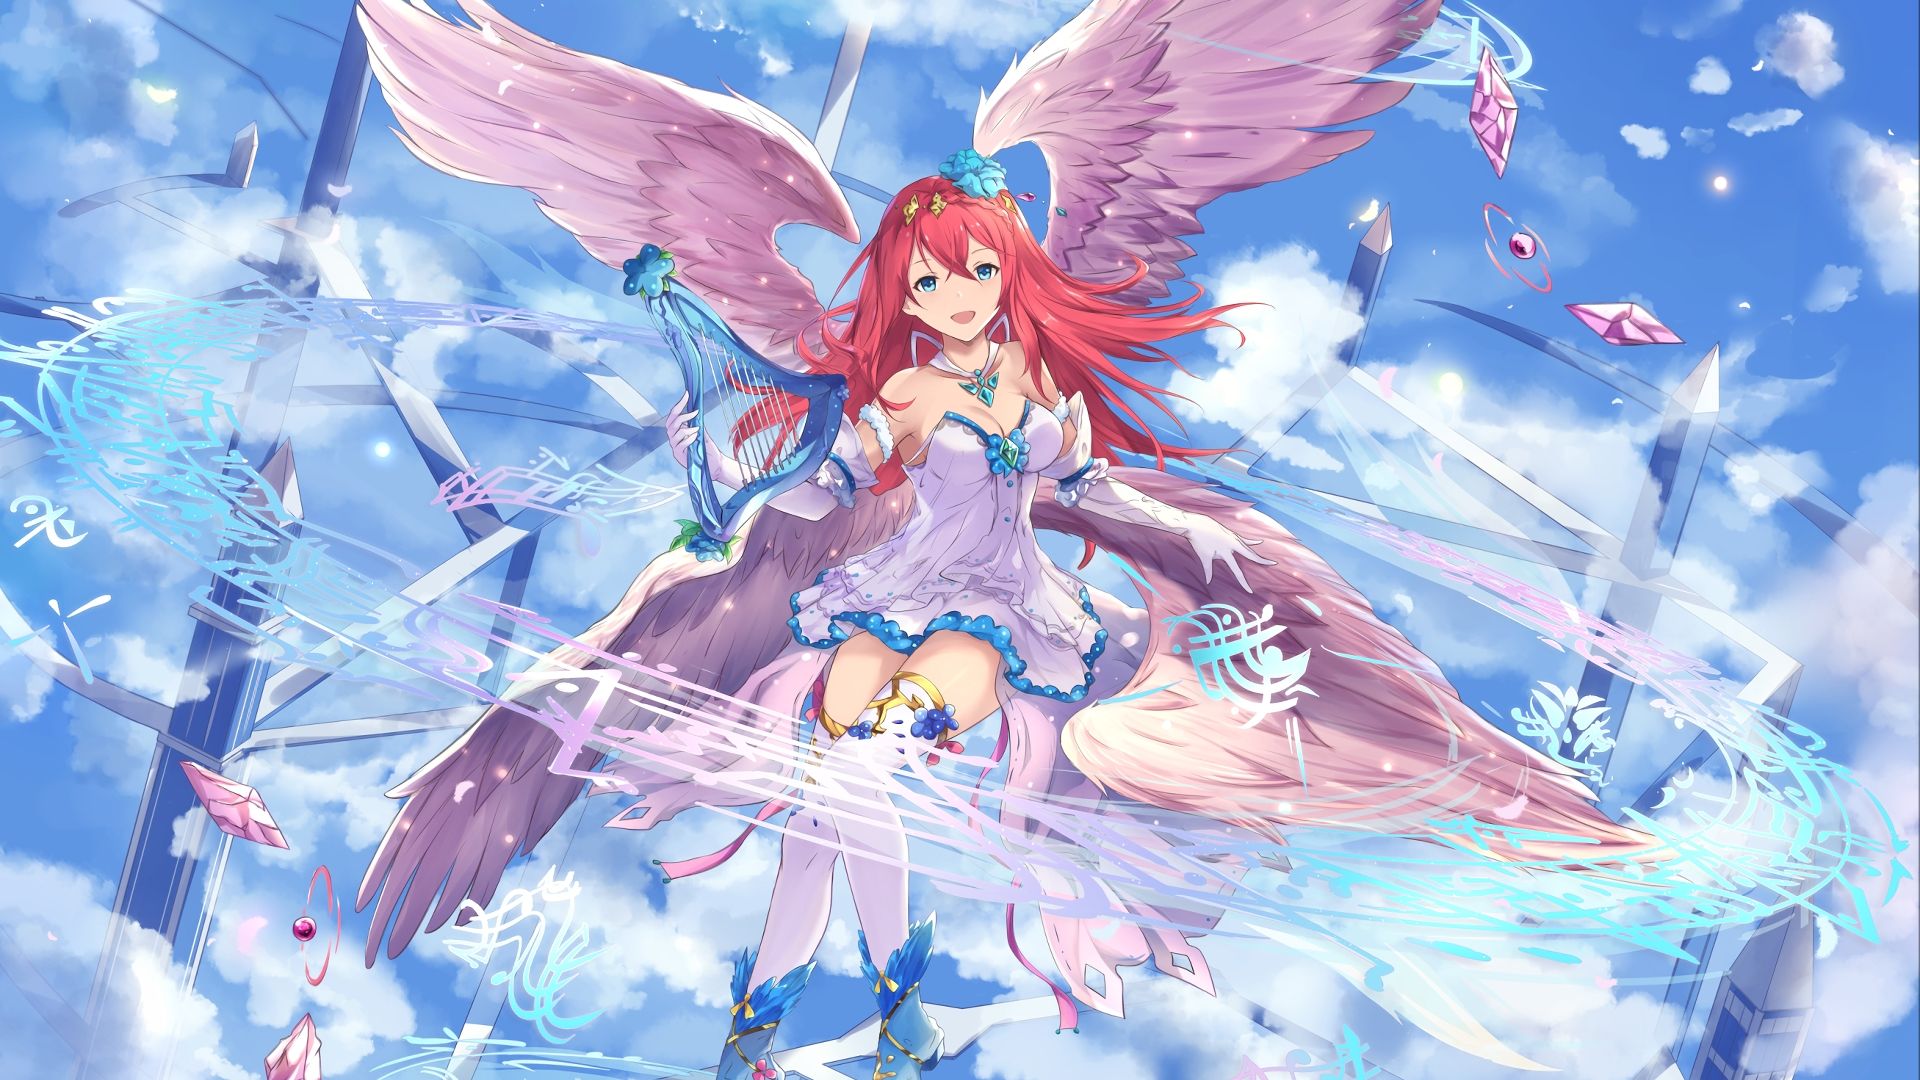 Anime Anime Girl Angel Wings HD Poster Paper Print  Animation  Cartoons  posters in India  Buy art film design movie music nature and  educational paintingswallpapers at Flipkartcom